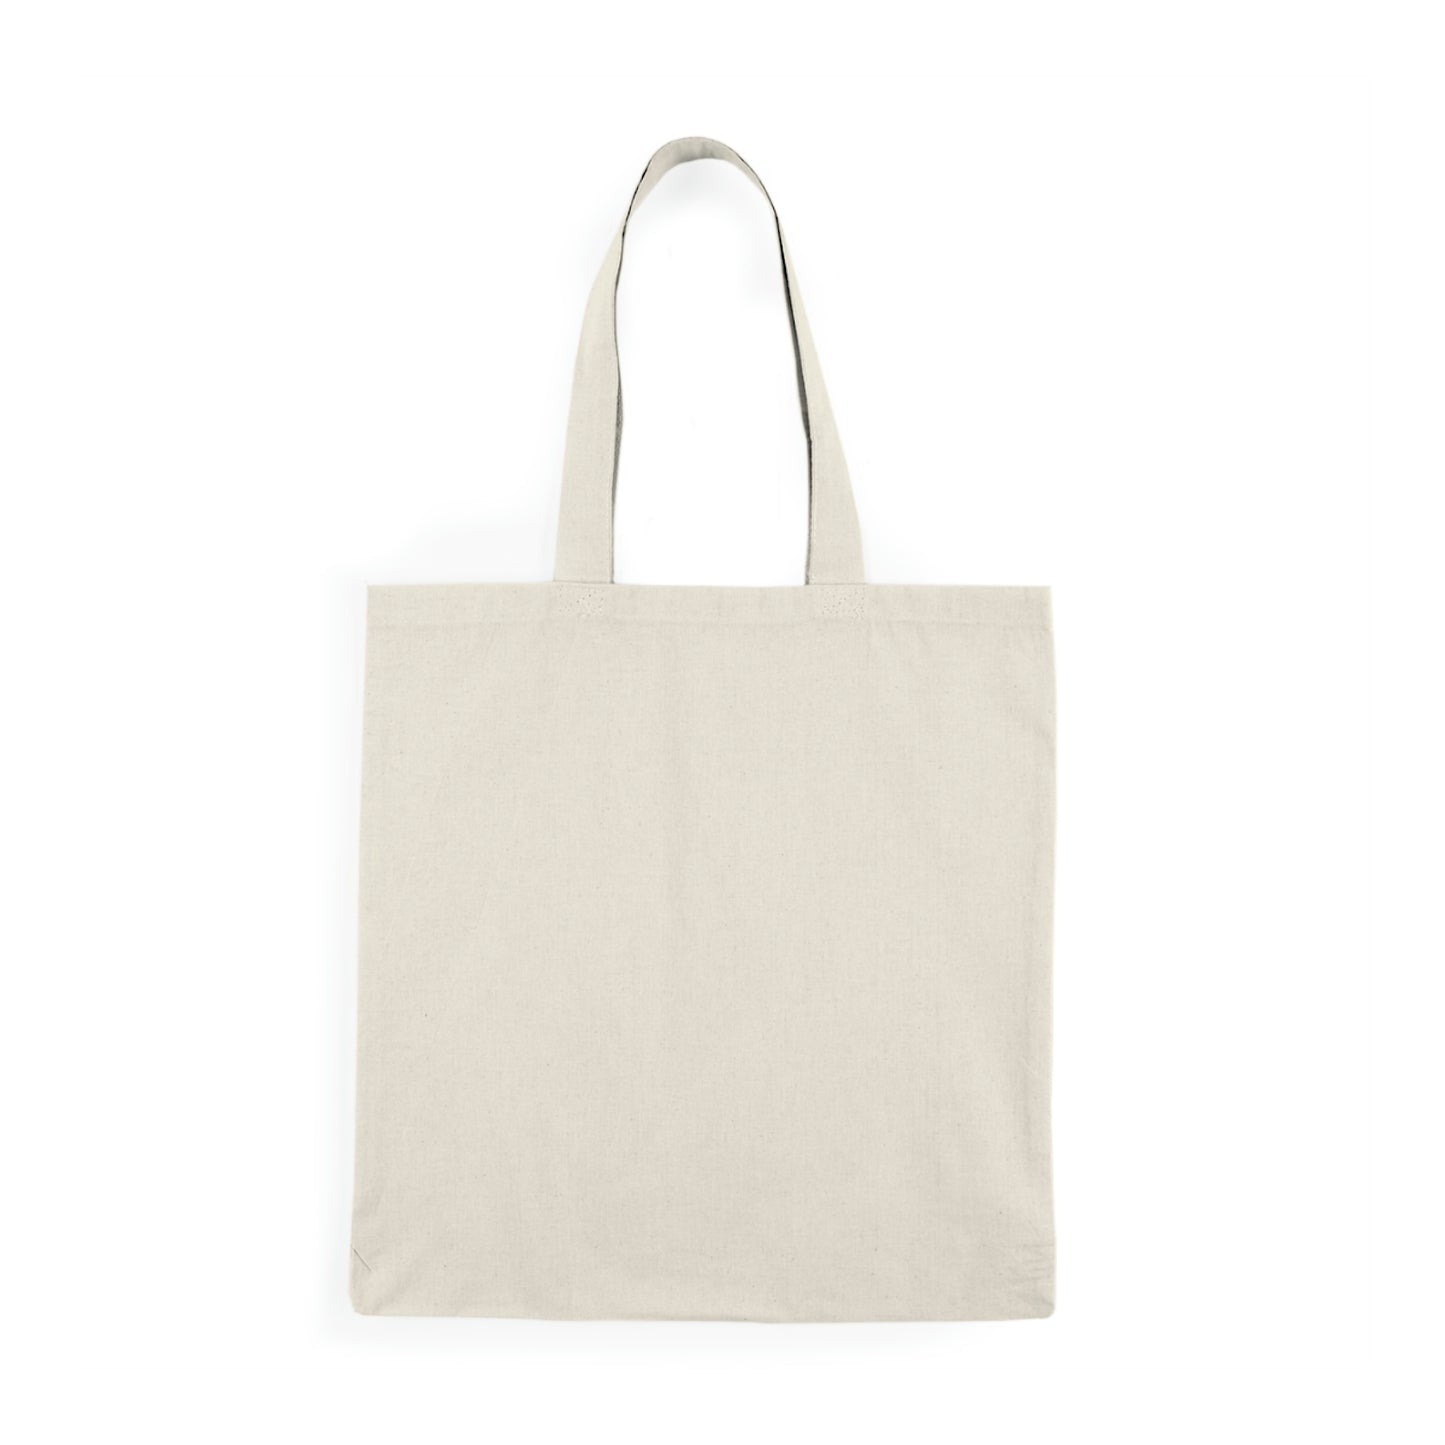 All That Glitters - Natural Tote Bag